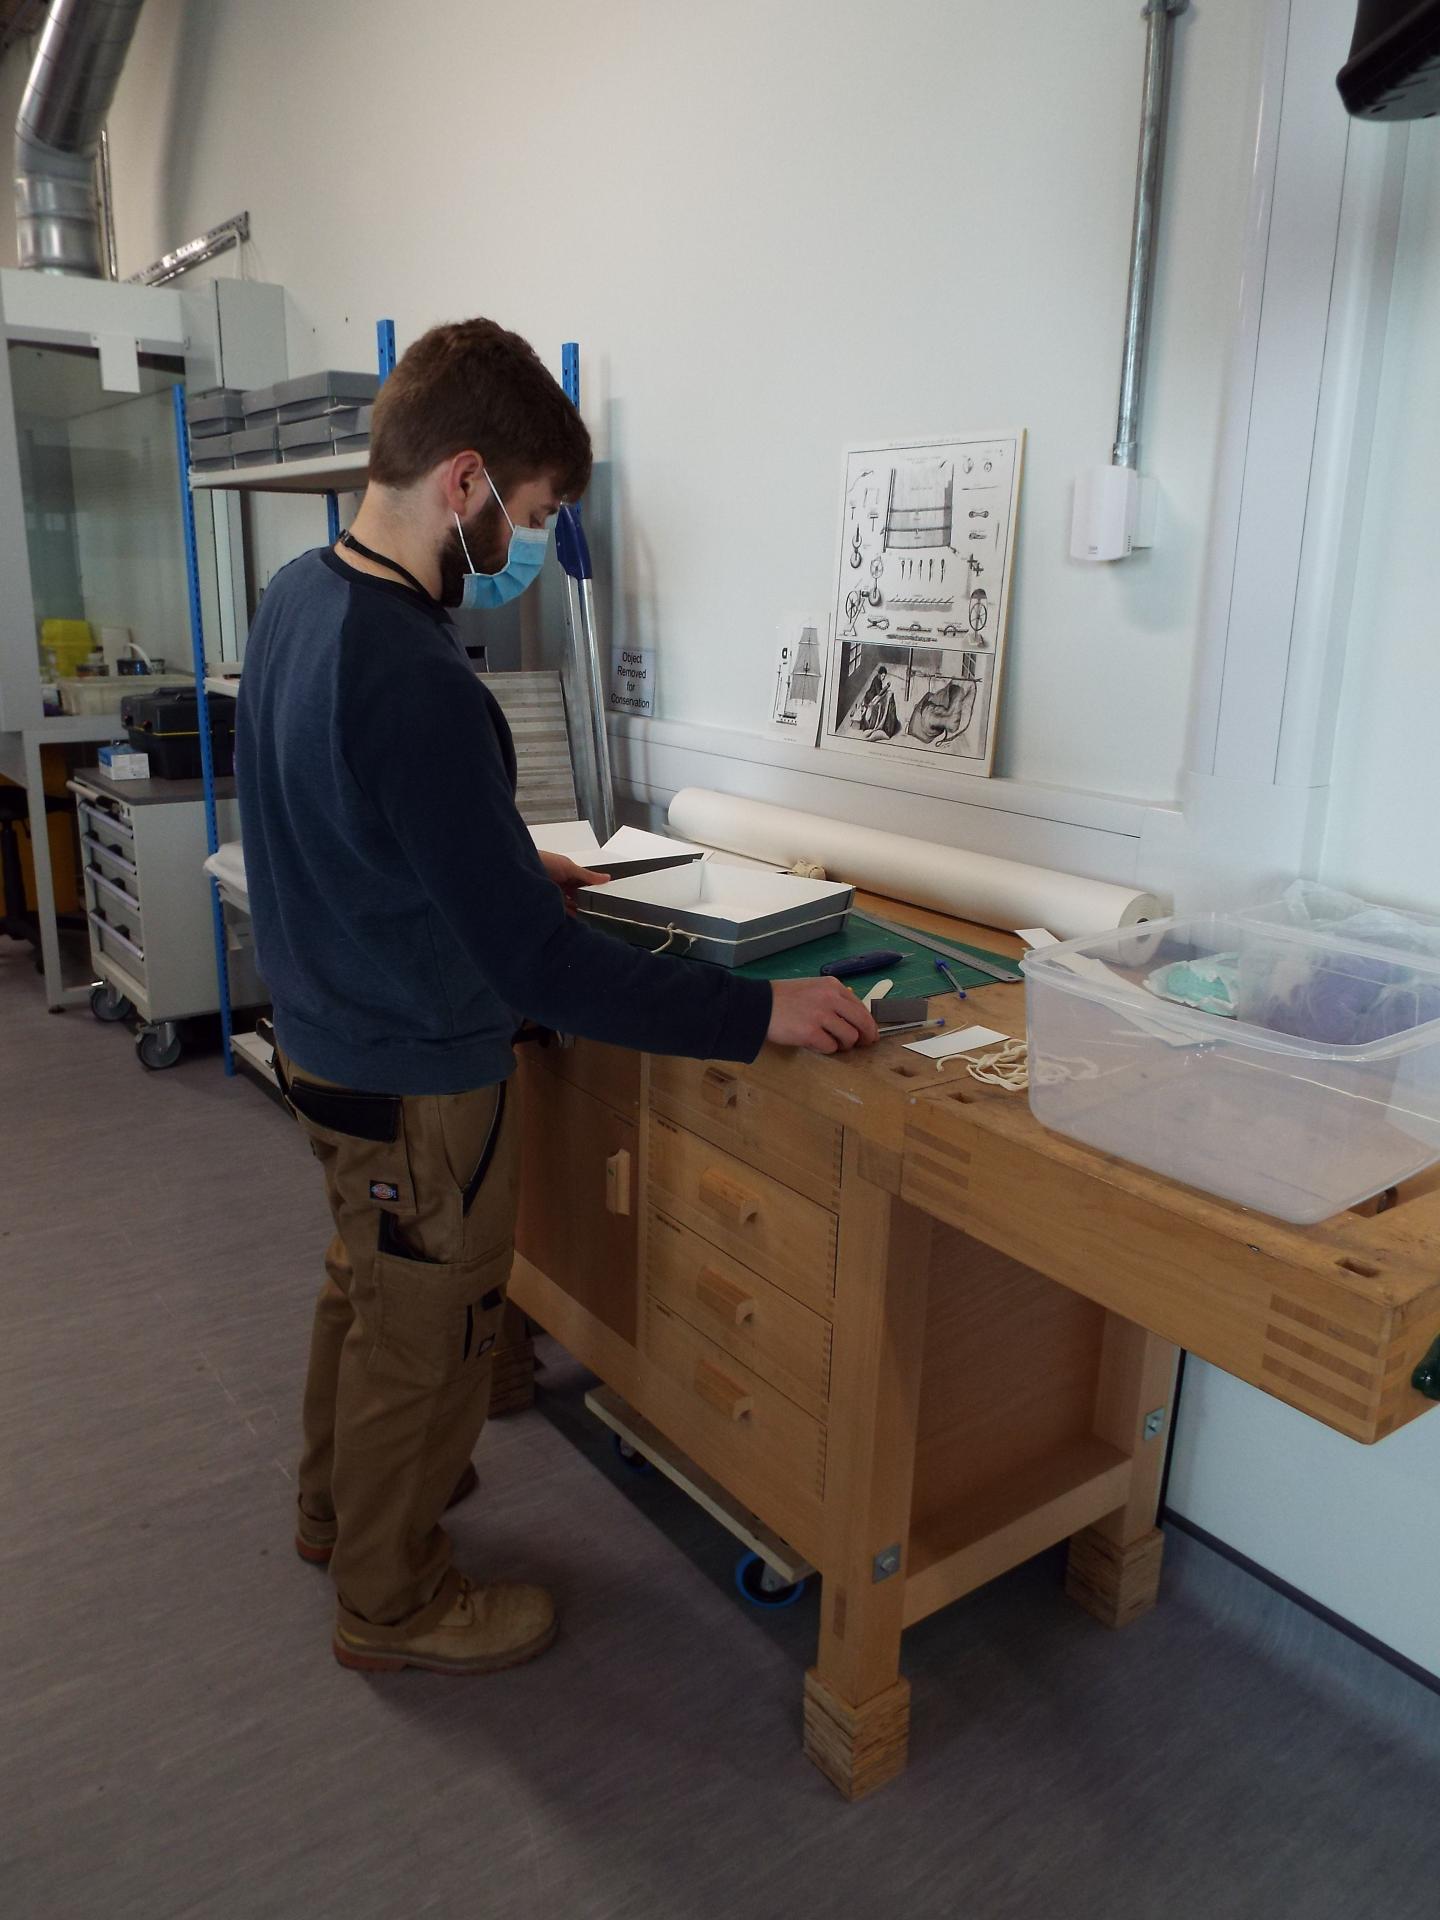 A conservationist stands at a desk creating trays